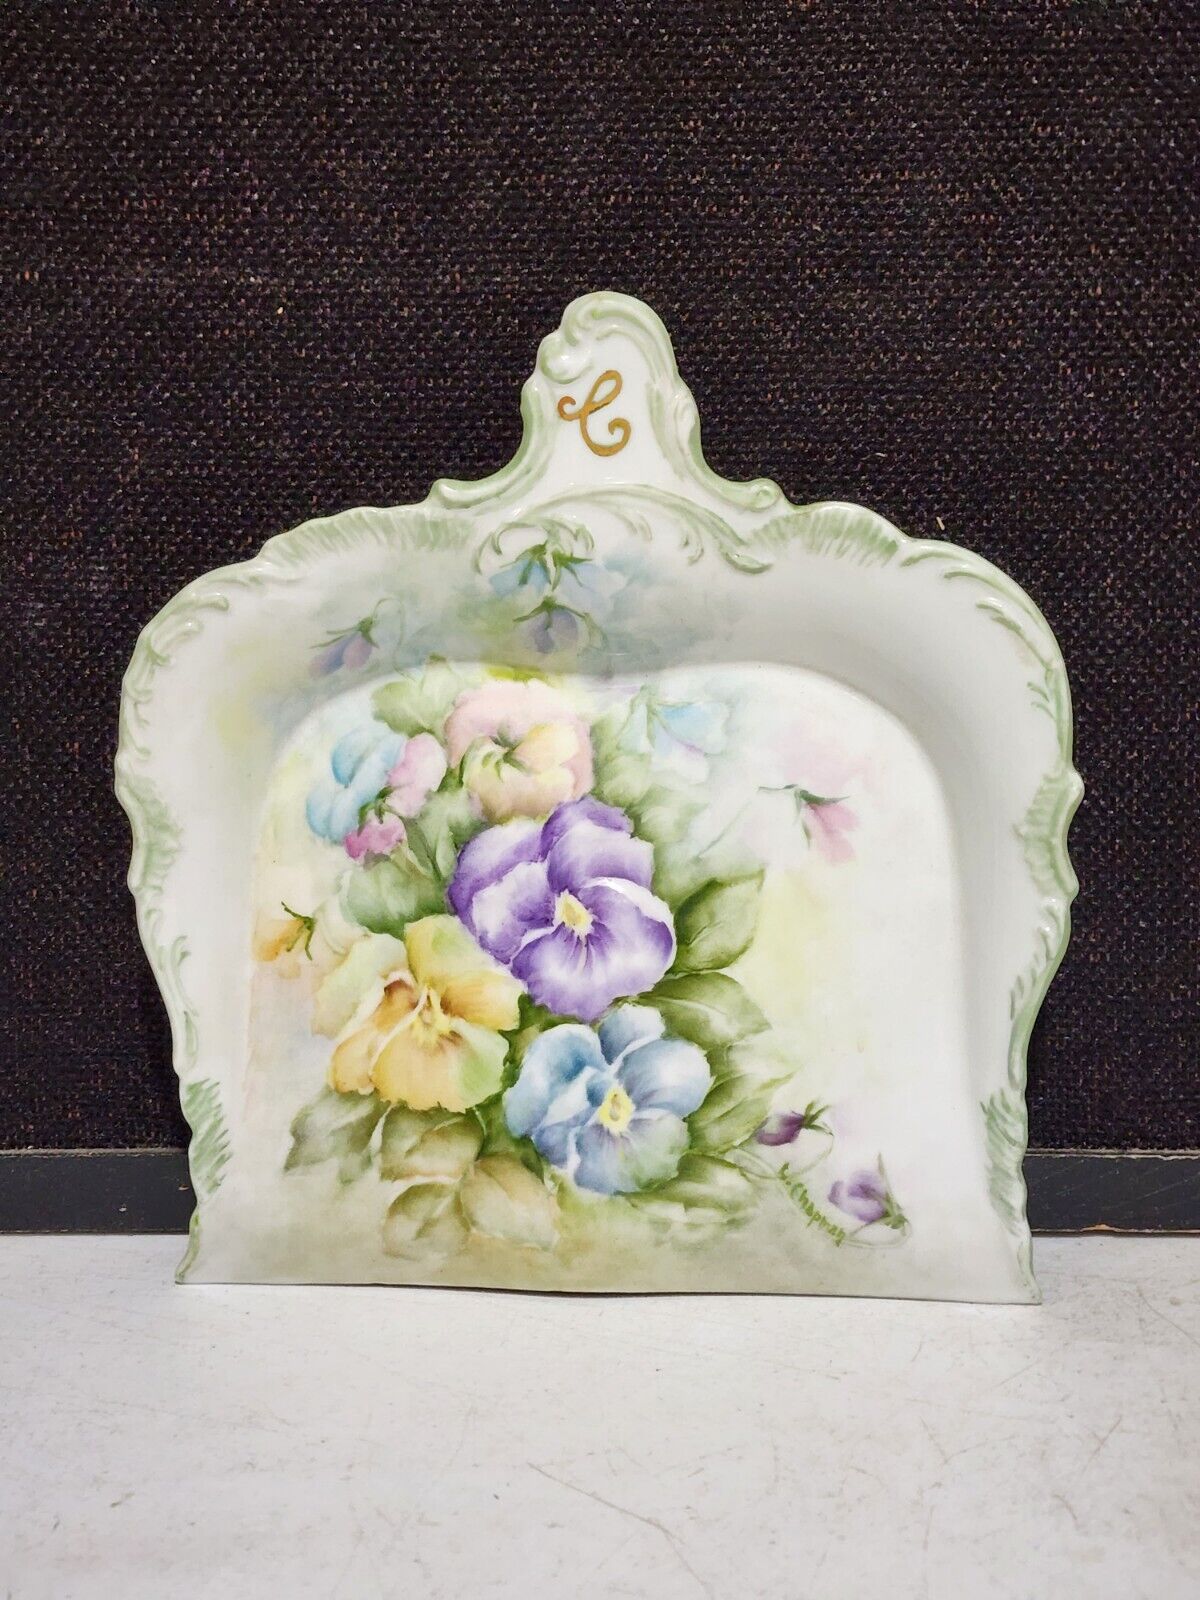 Vintage Porcelain Crumb Tray Dustpan Hand Painted Pansies Flowers Signed